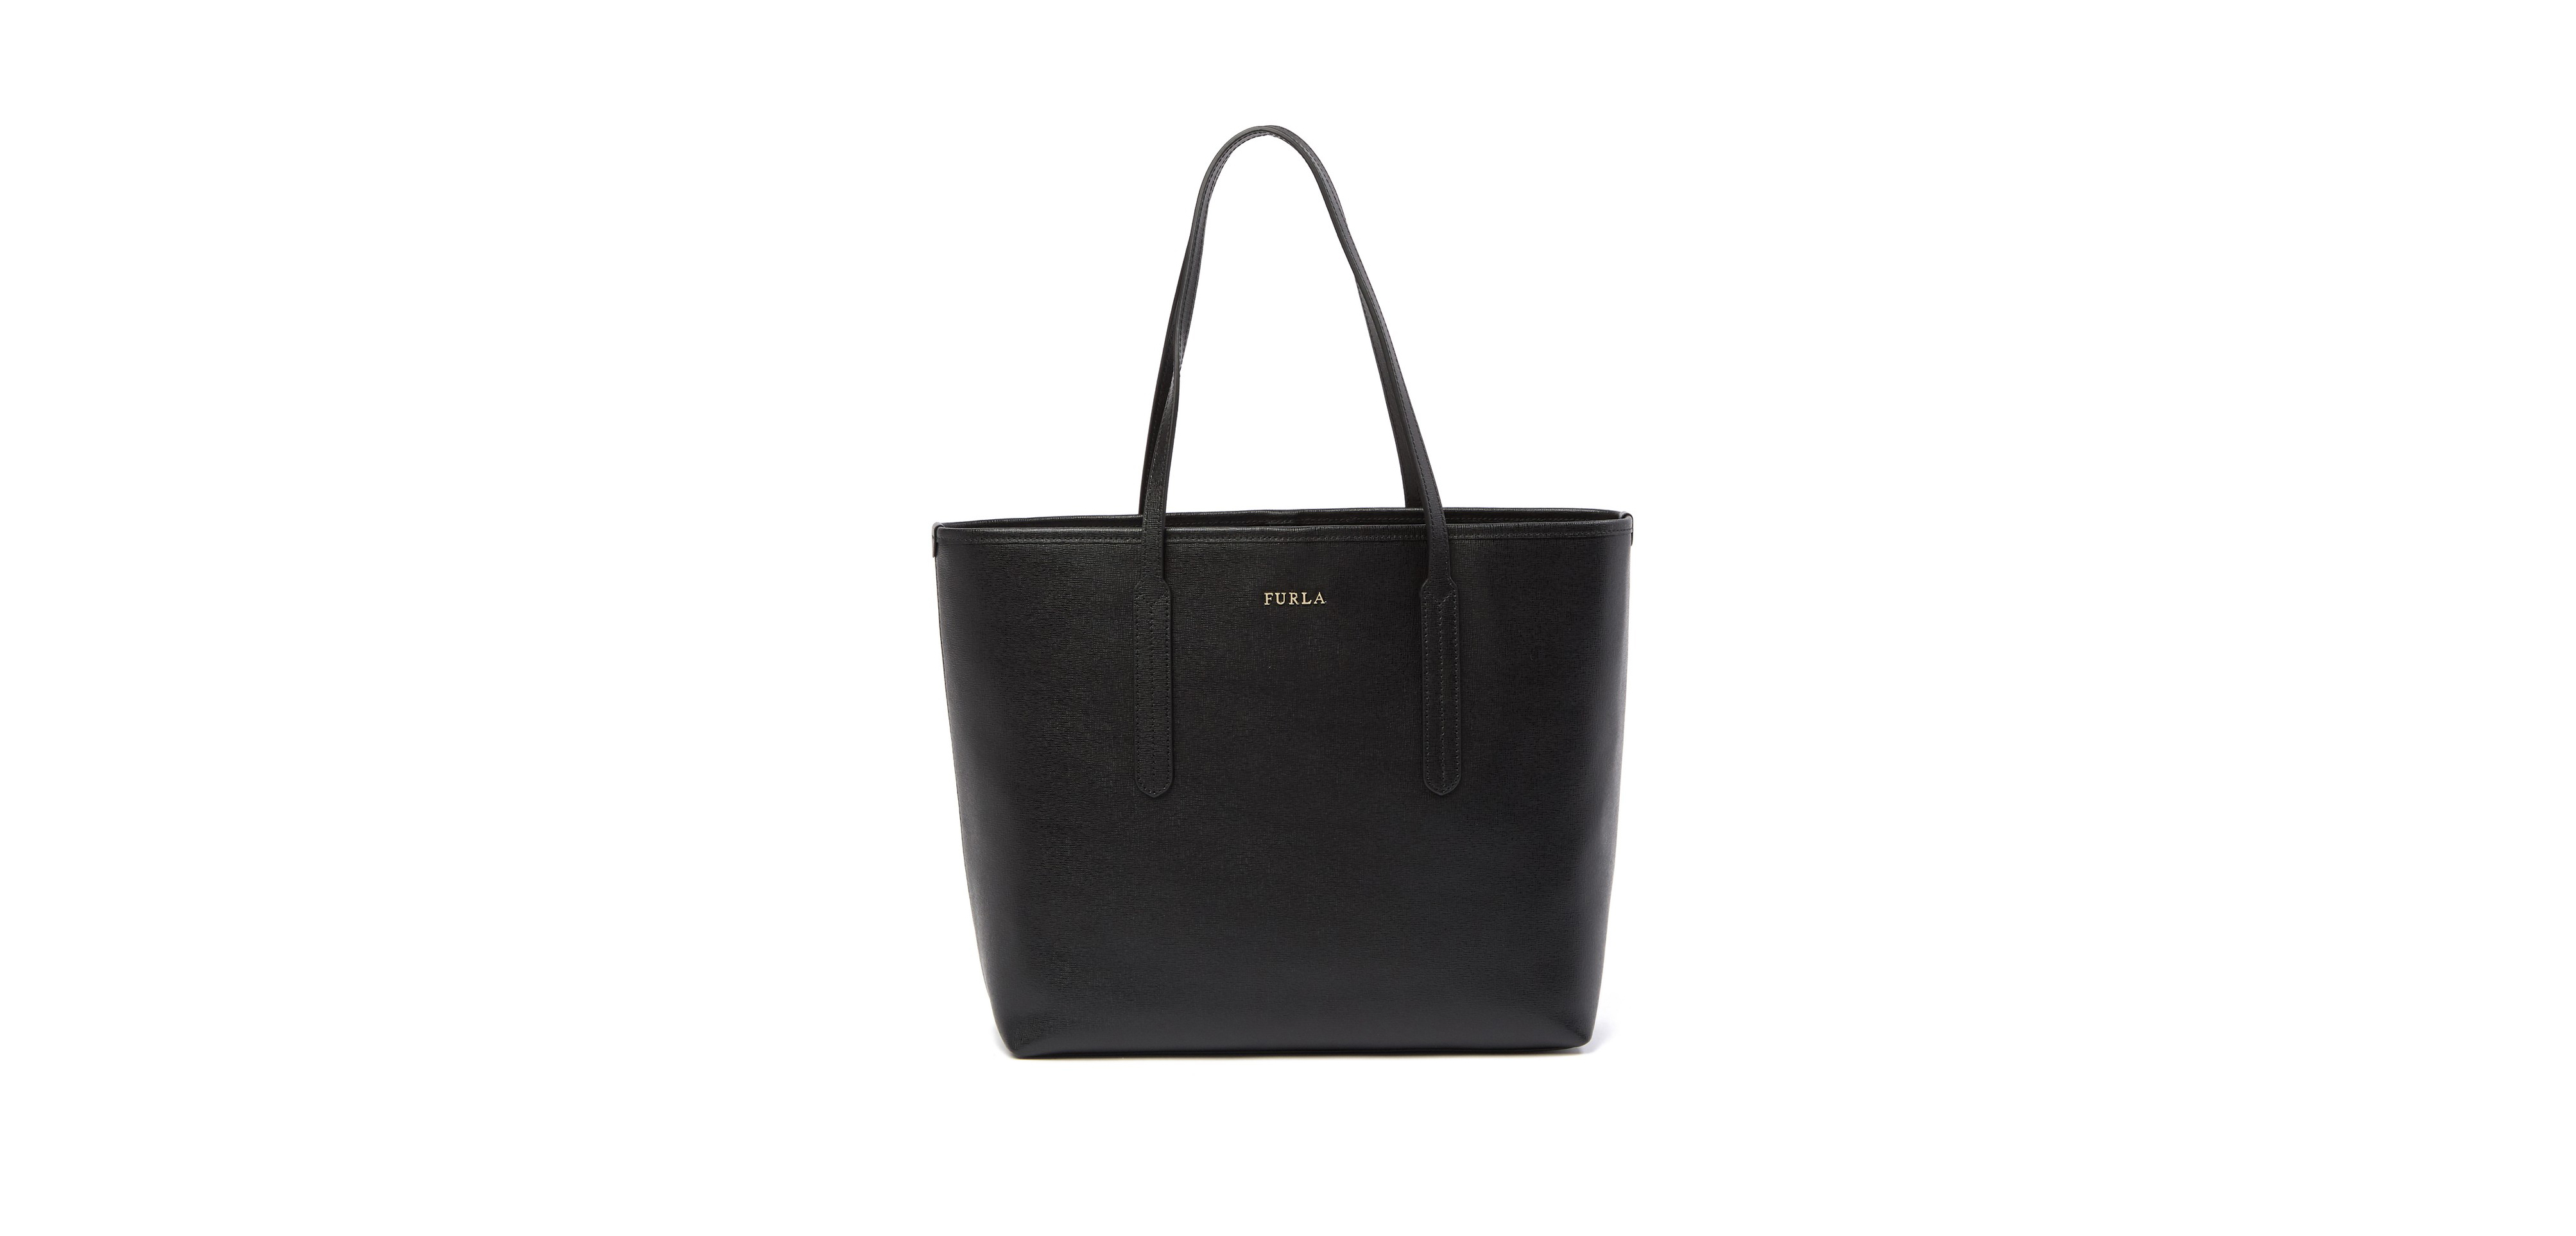 This Furla Tote Bag Is 54% Off and We Can't Stop Freaking Out